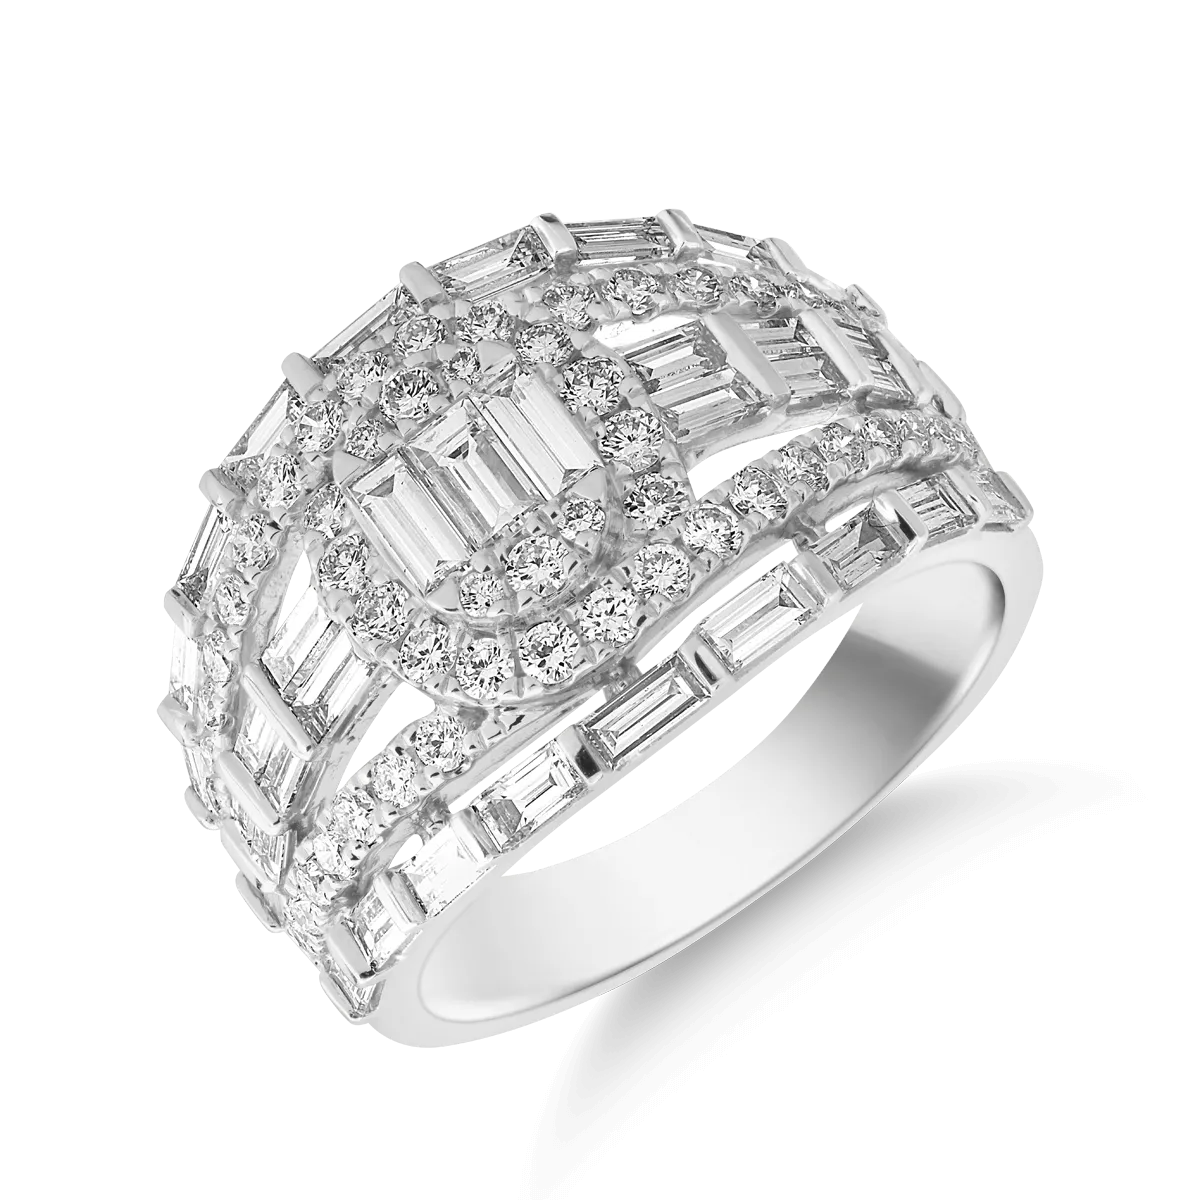 18K white gold ring with 1.85ct diamonds